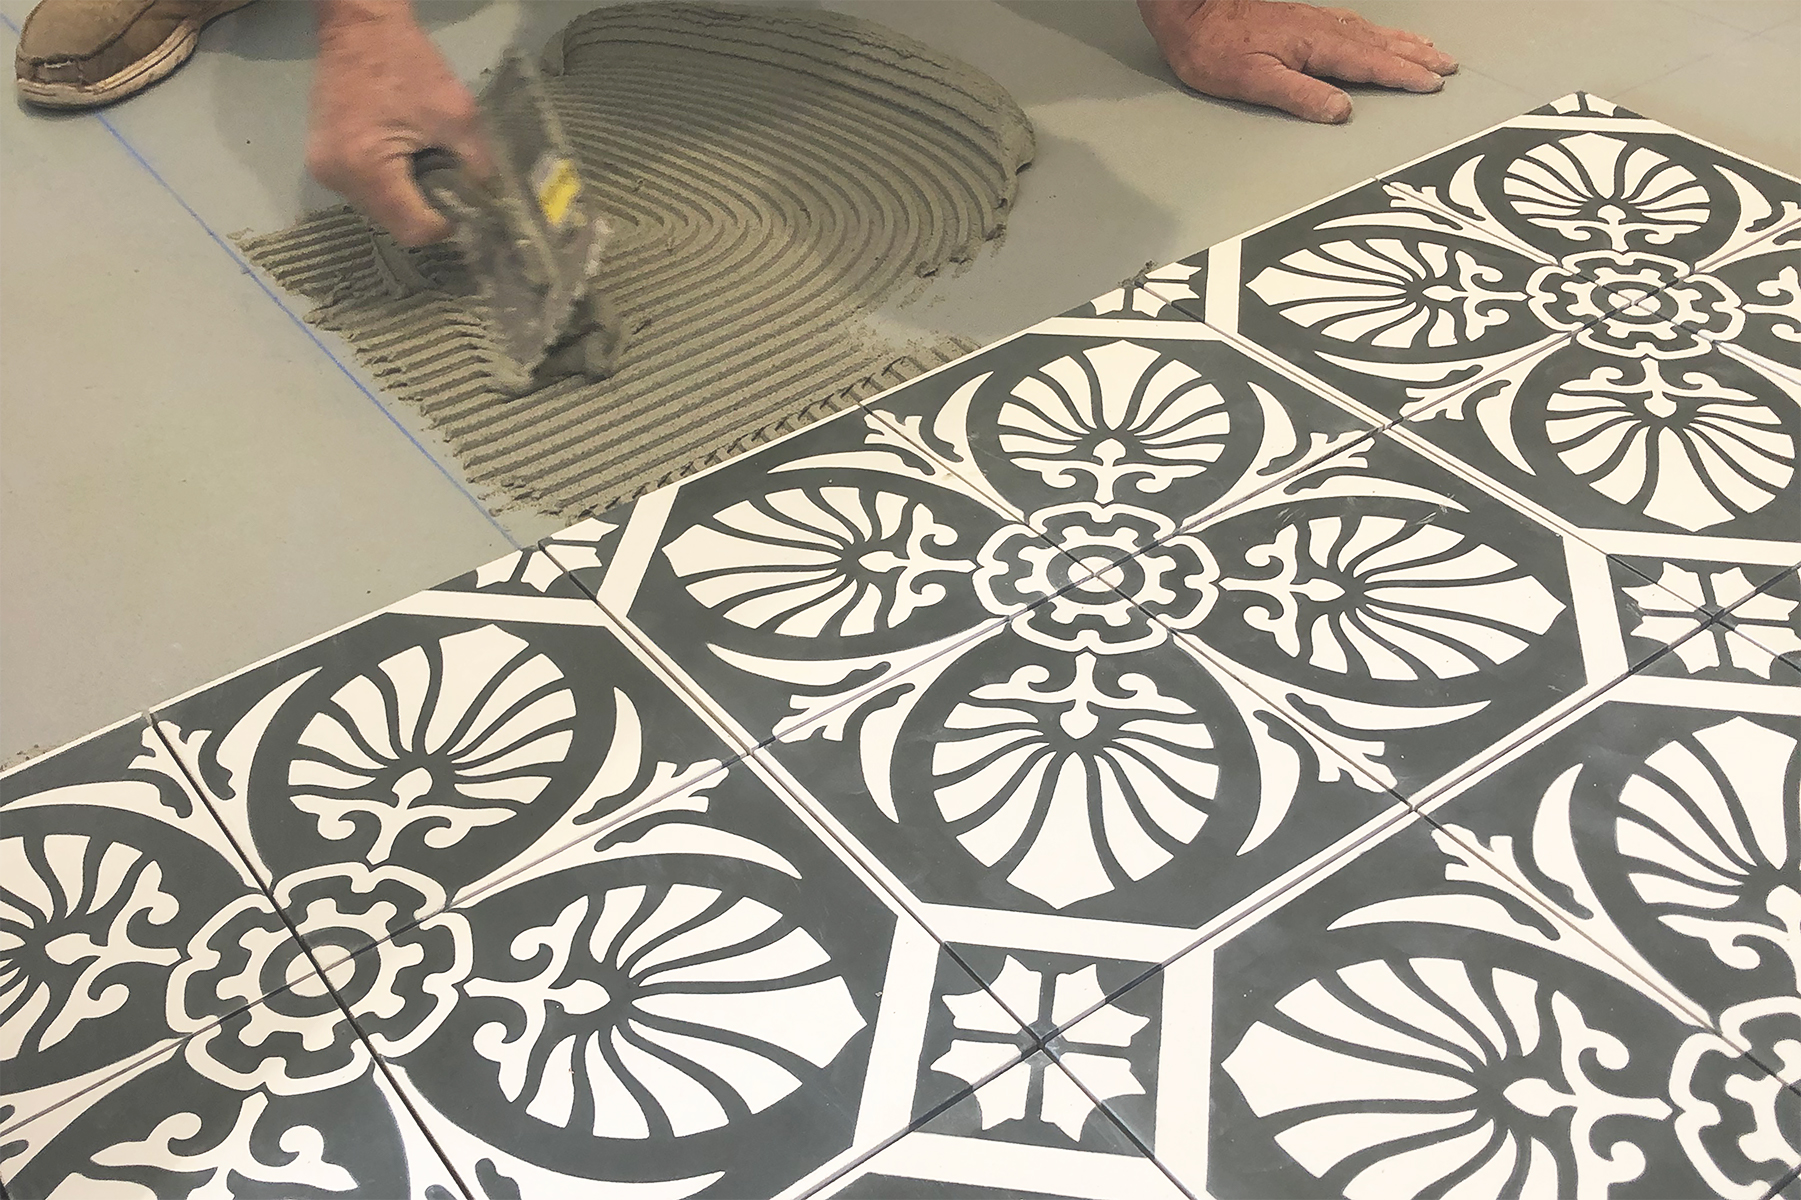 Installation of Hoja encaustic cement tile